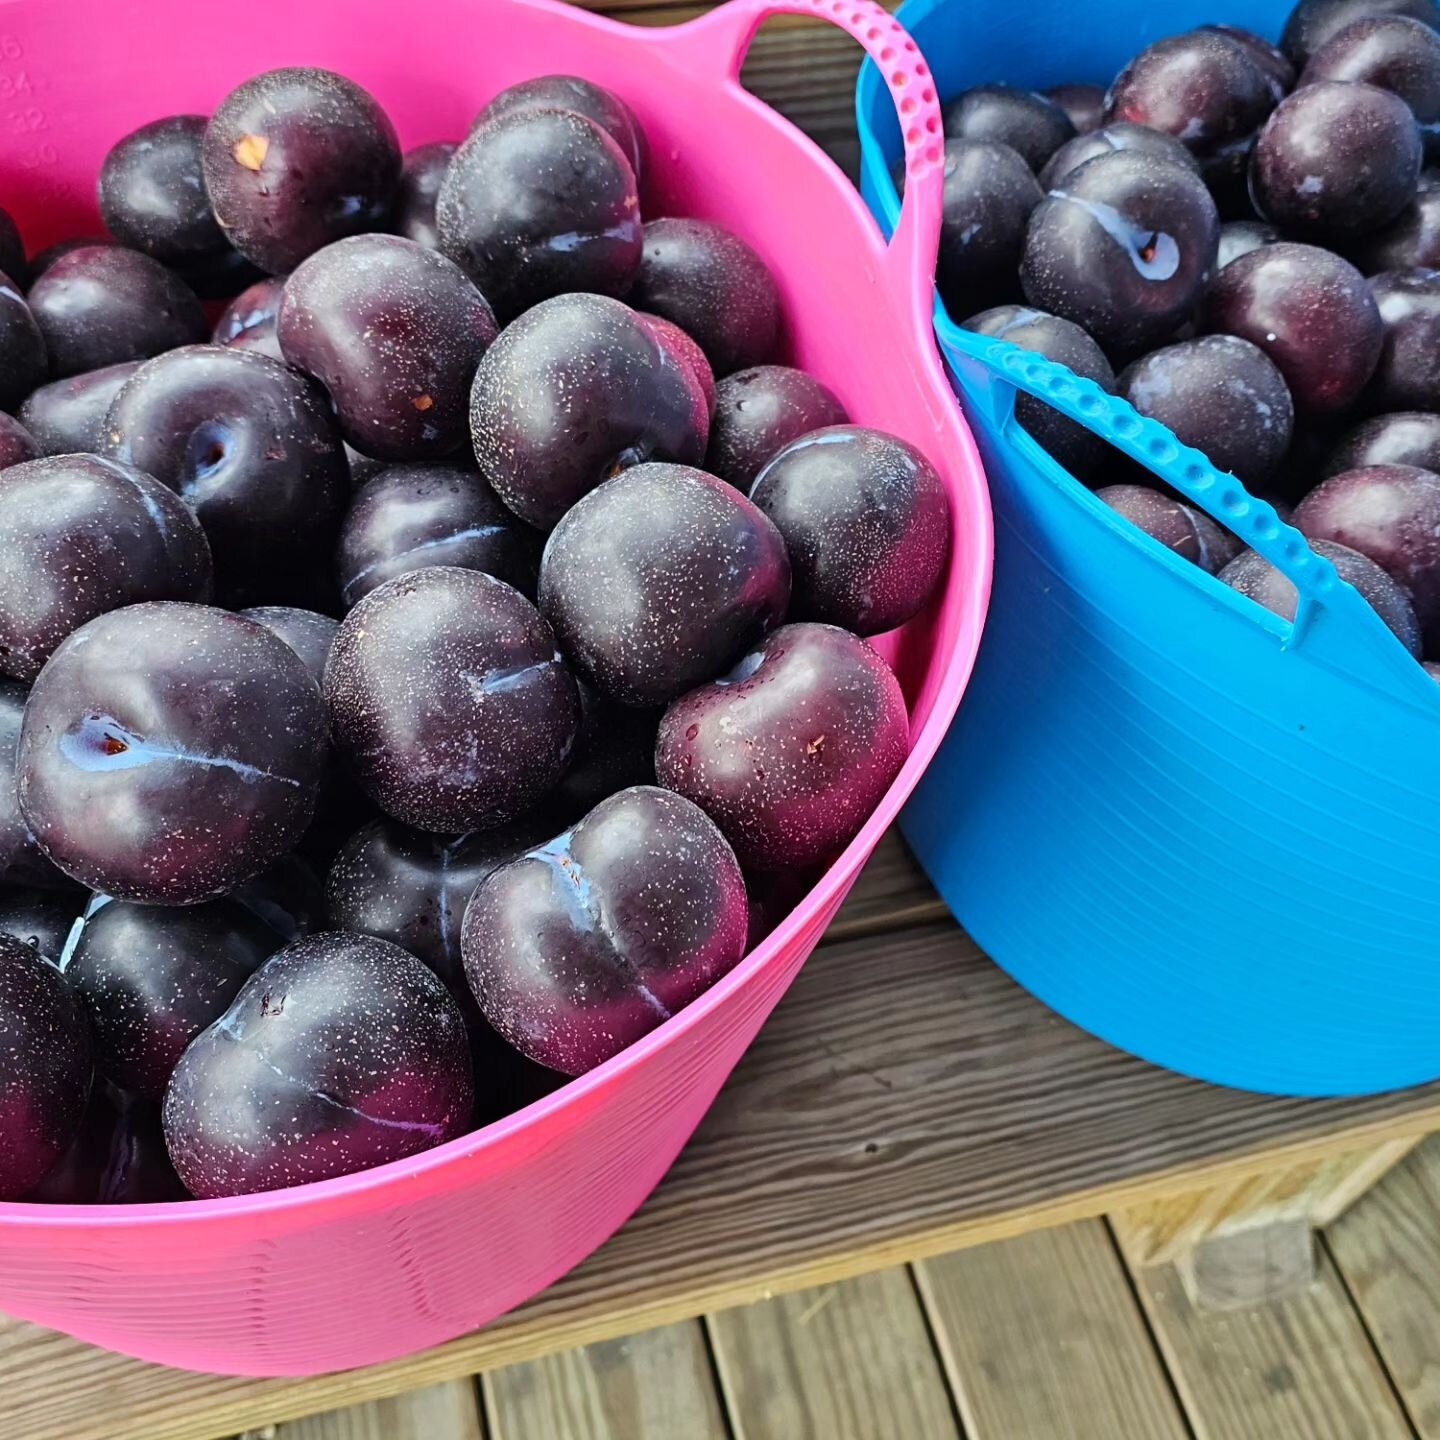 It's quintessential summer vibes when the stone fruits arrive. The kitchen smells amazing as we have a room full of plums, peaches, and nectarines lined up to be made into ice creams and sorbets. Coming soon to our Bar Harbor and Portland stores. #st